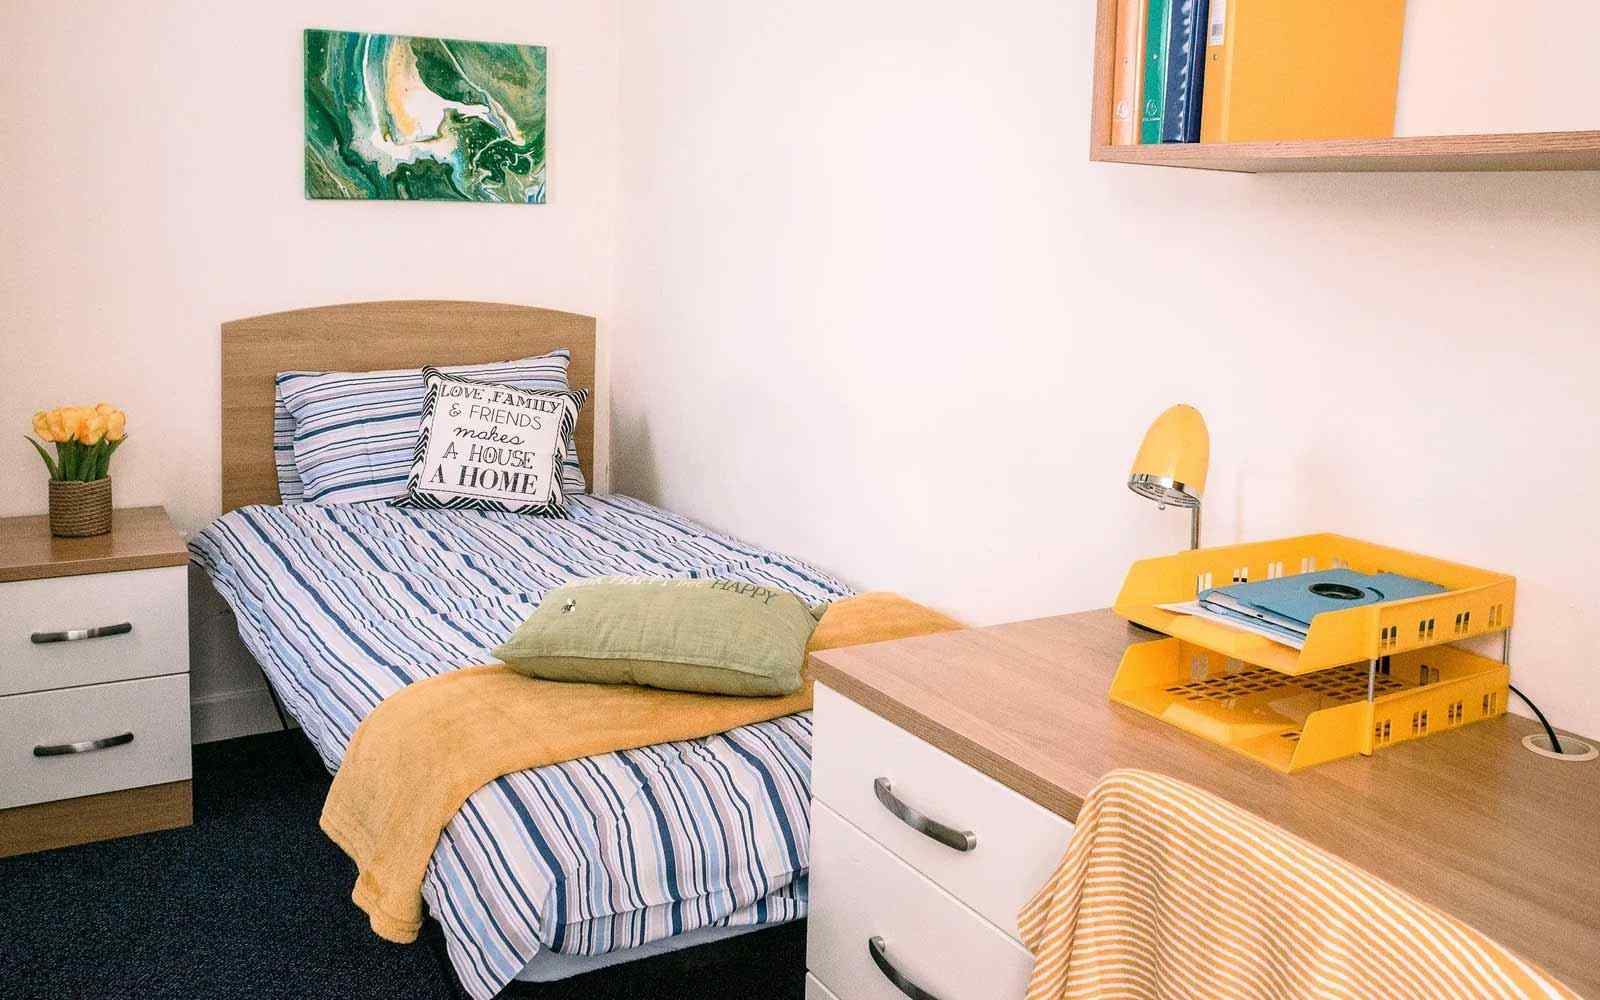 View of a room in Garden Street accommodation with bed, cushions, desk, shelves and wall art. 